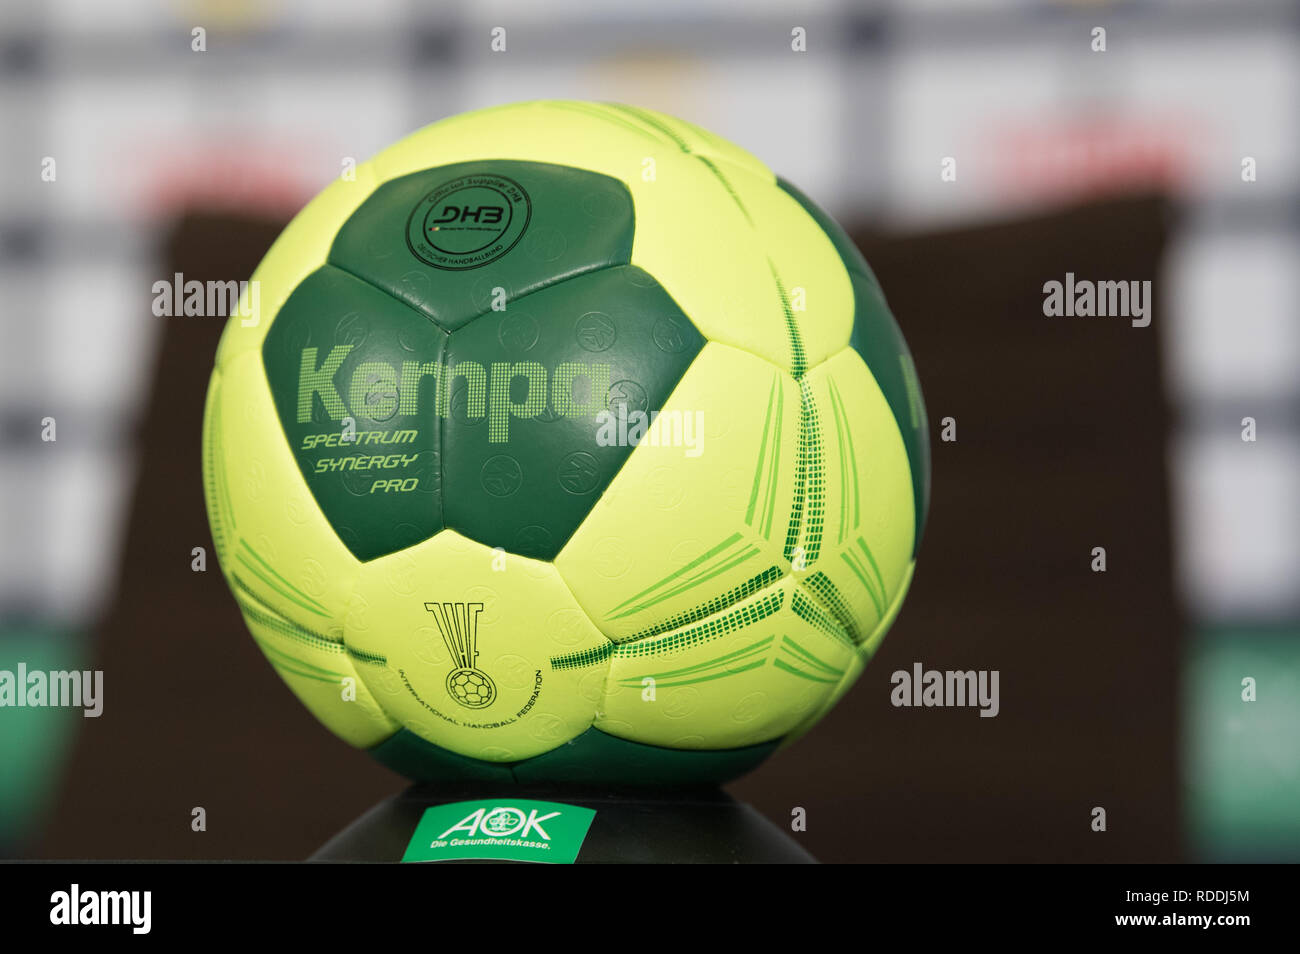 Berlin, Germany. 18th Jan, 2019. A handball with the imprint "DHB Kempa  Spectrum Synergy Pro" is on an AOK stand during a press conference after  Germany's World Cup victory against Serbia. Credit: